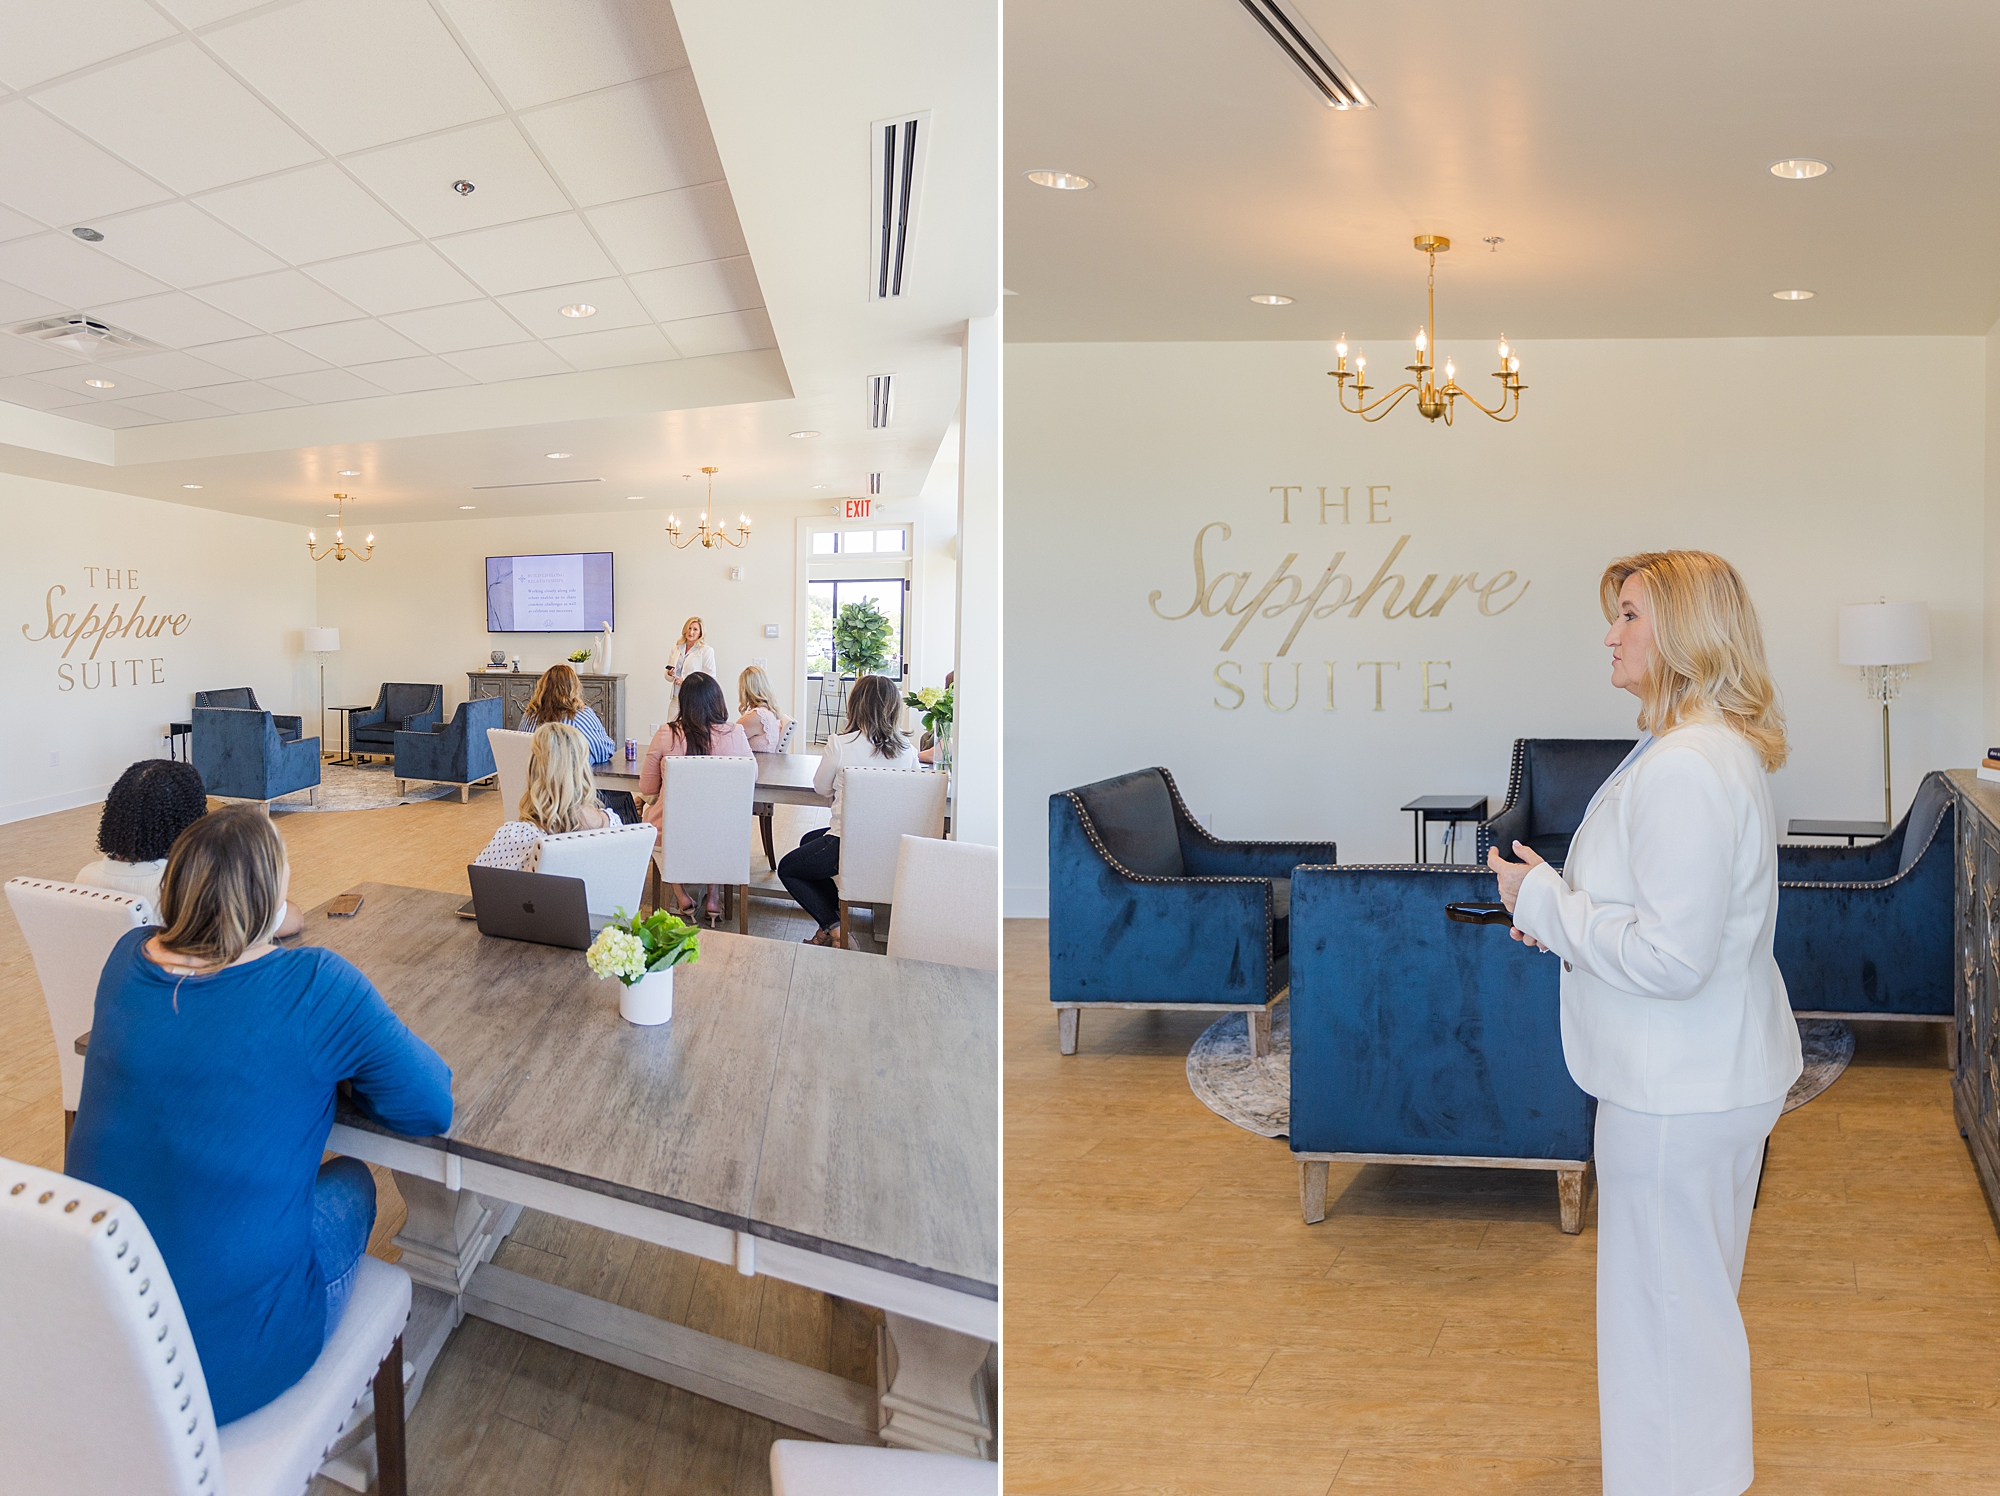 owner of The Sapphire Suite talks with woman co-working